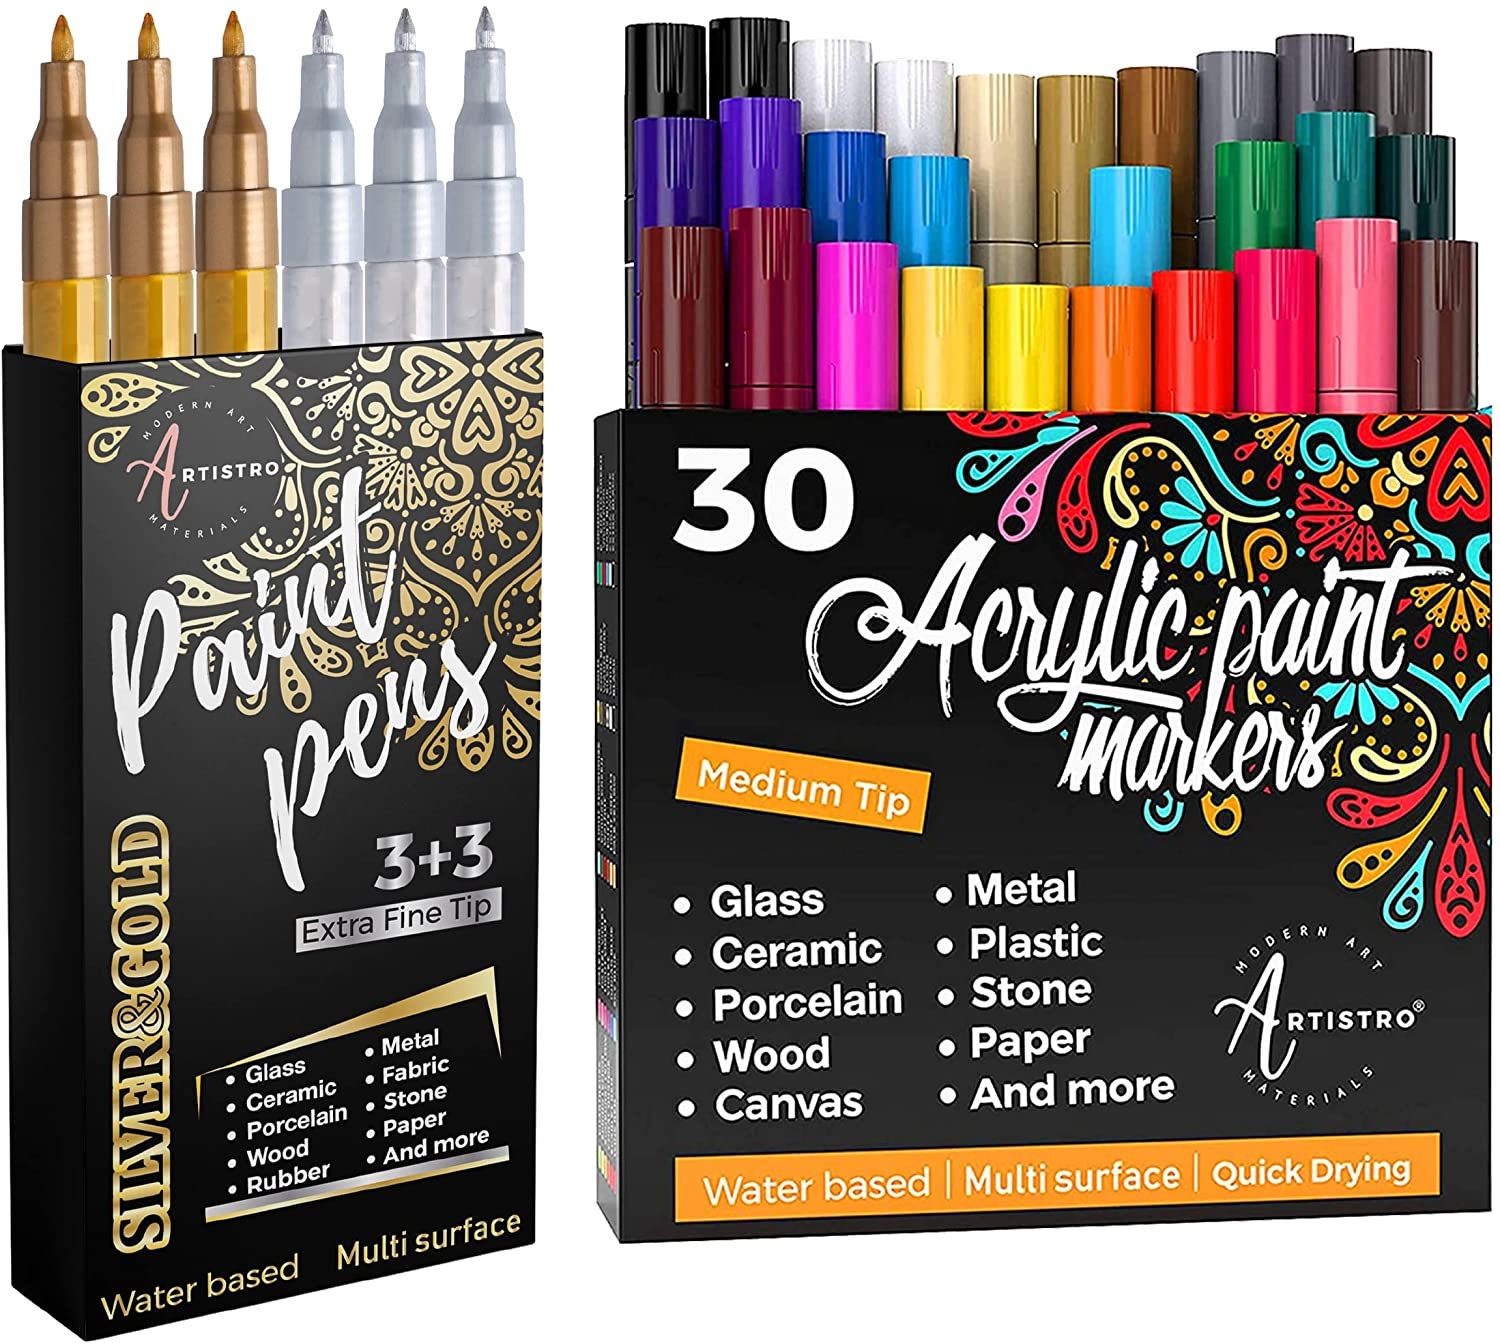 Chisel Tip Acrylic Markers - Set of 12 - Acrylic Paint Pens - Vibrant Art  Markers for Glass, Metal, Ceramic, Mugs, Wood, DIY, Rock Painting - Quick